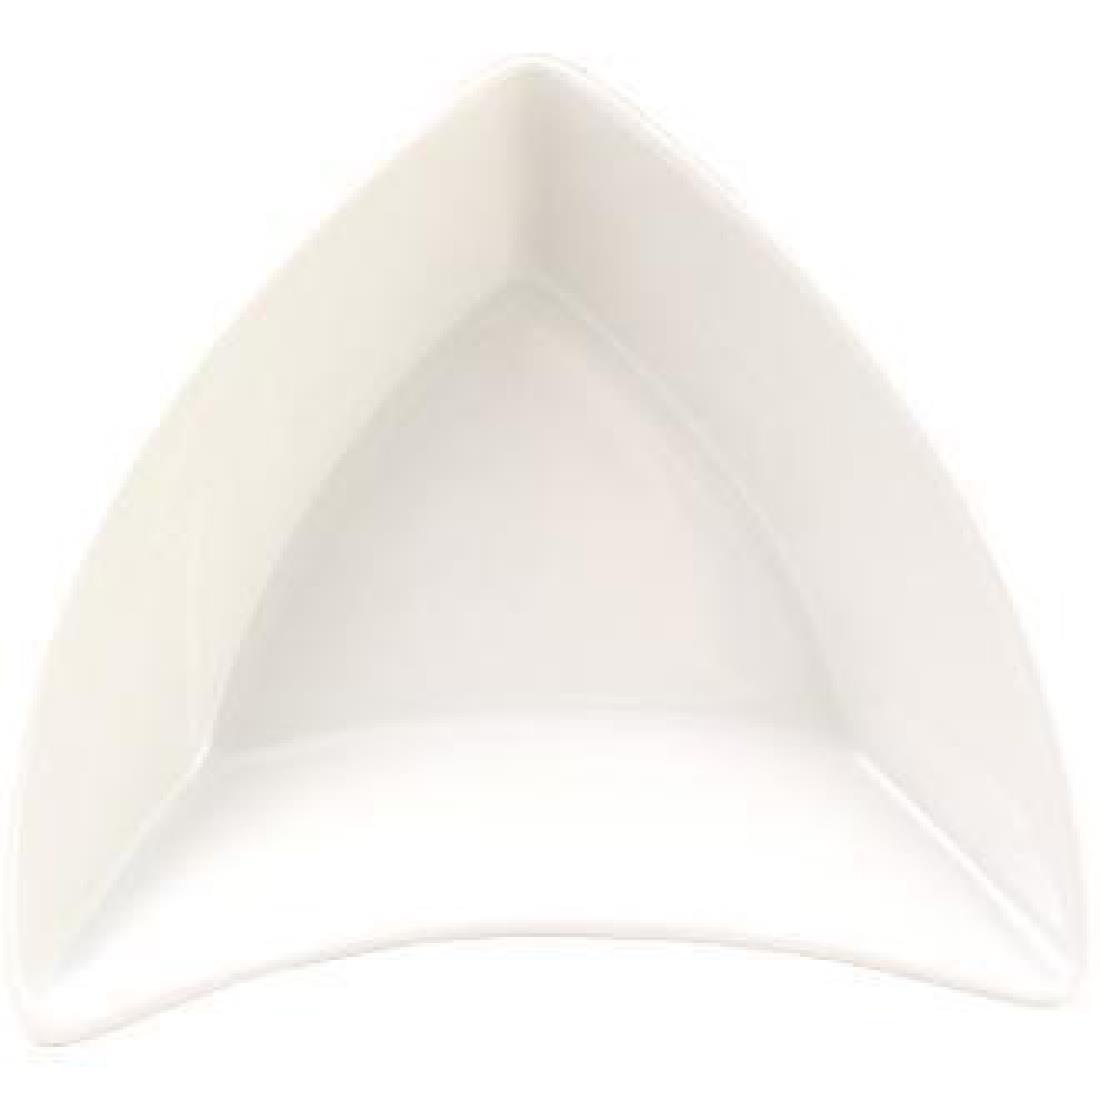 Churchill Voyager Lunar Dishes White 137mm (Pack of 12) - P438  - 1